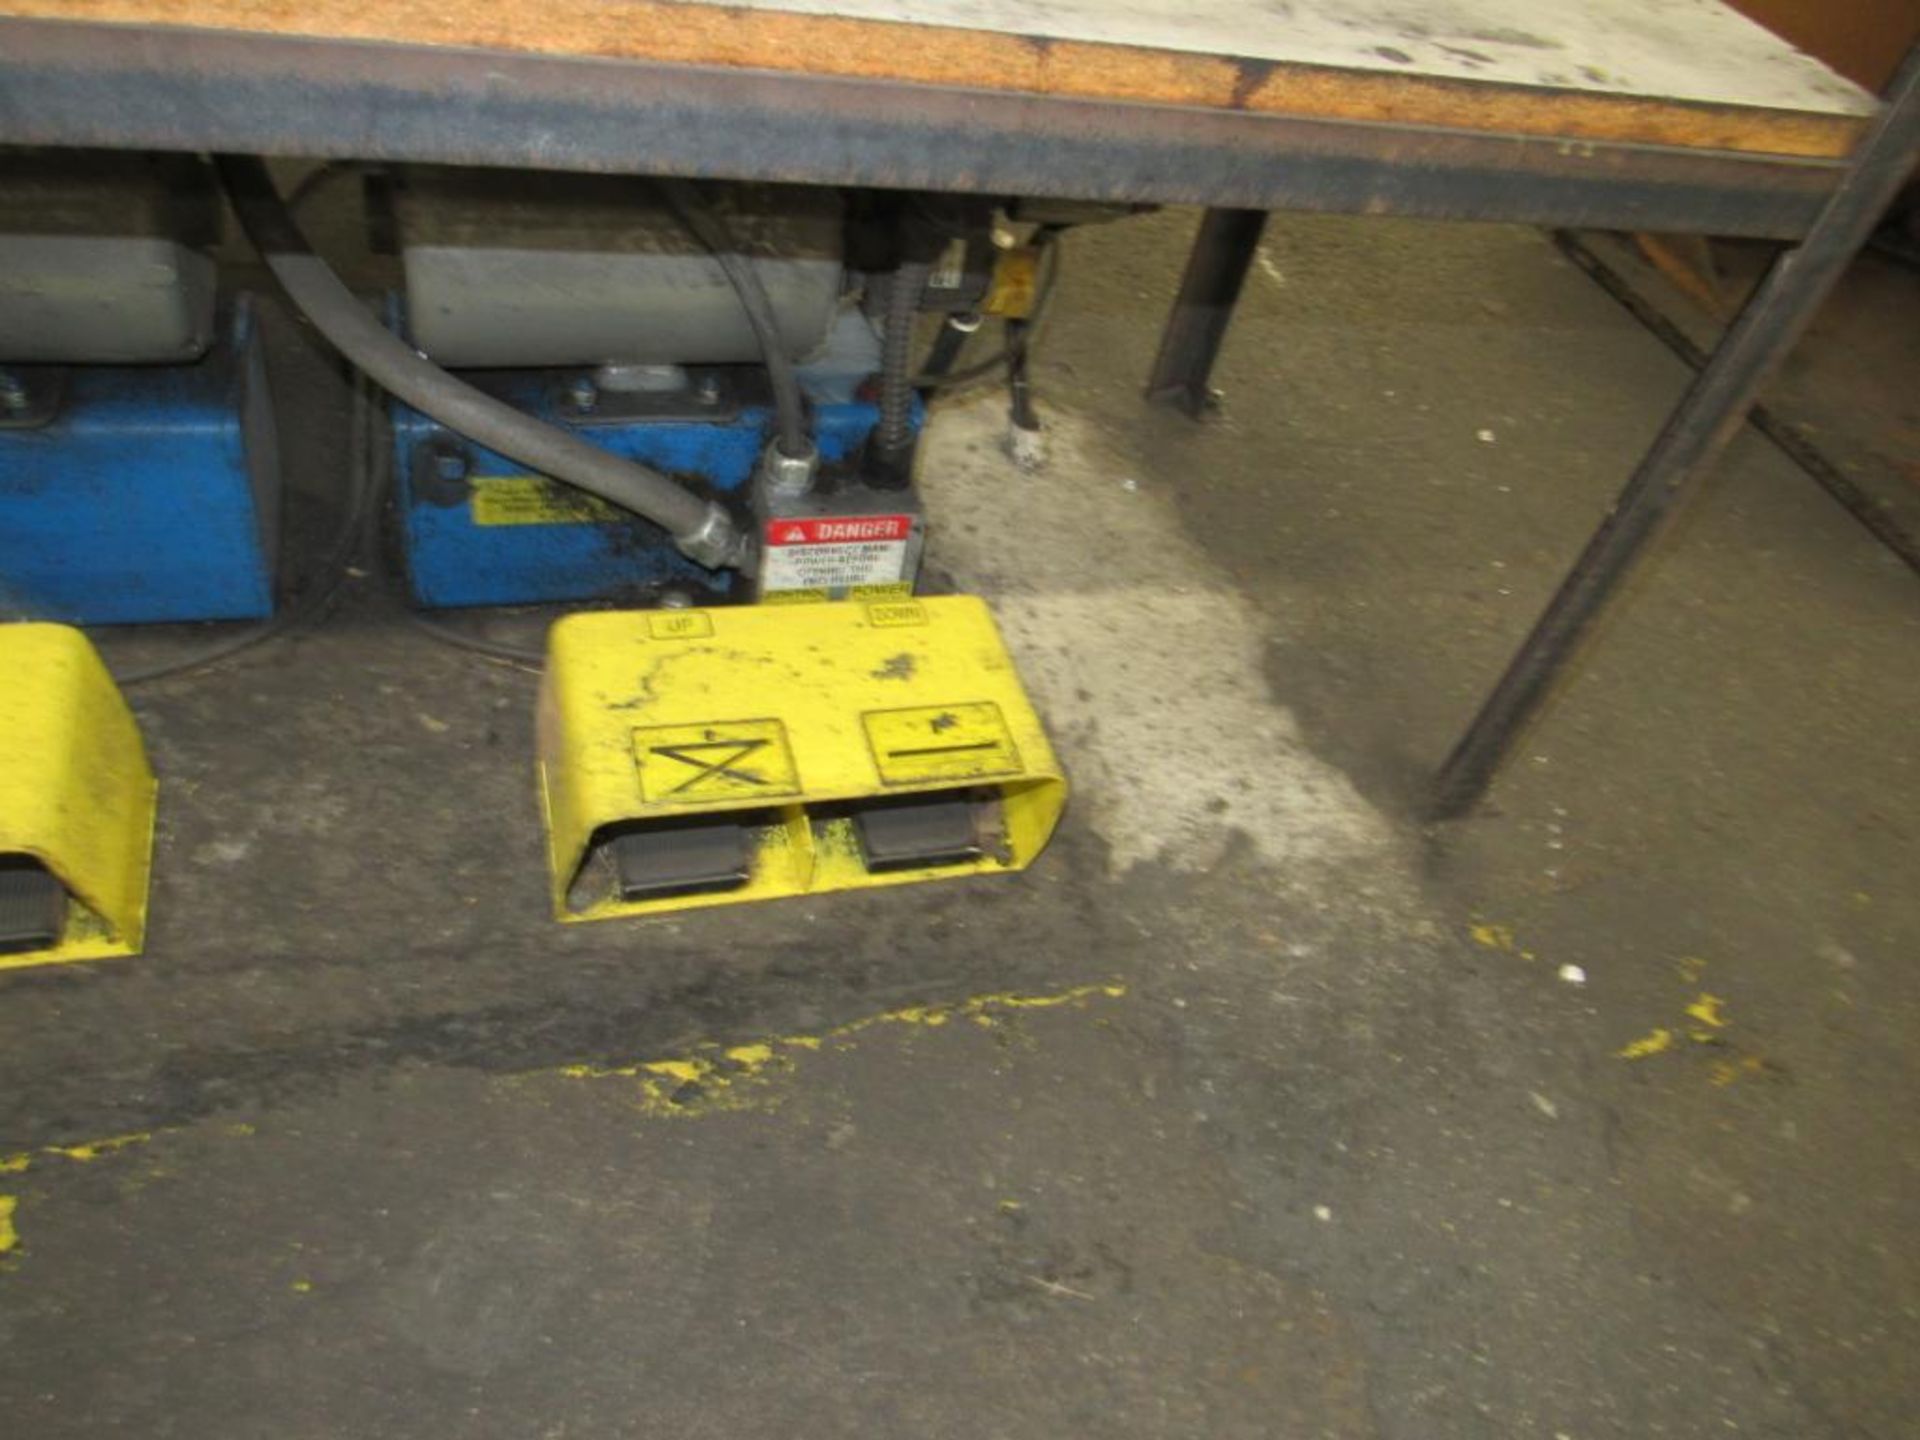 Southworth 48 in. x 50 in. Hydraulic Skid Lift (Location A-2) - Image 2 of 2